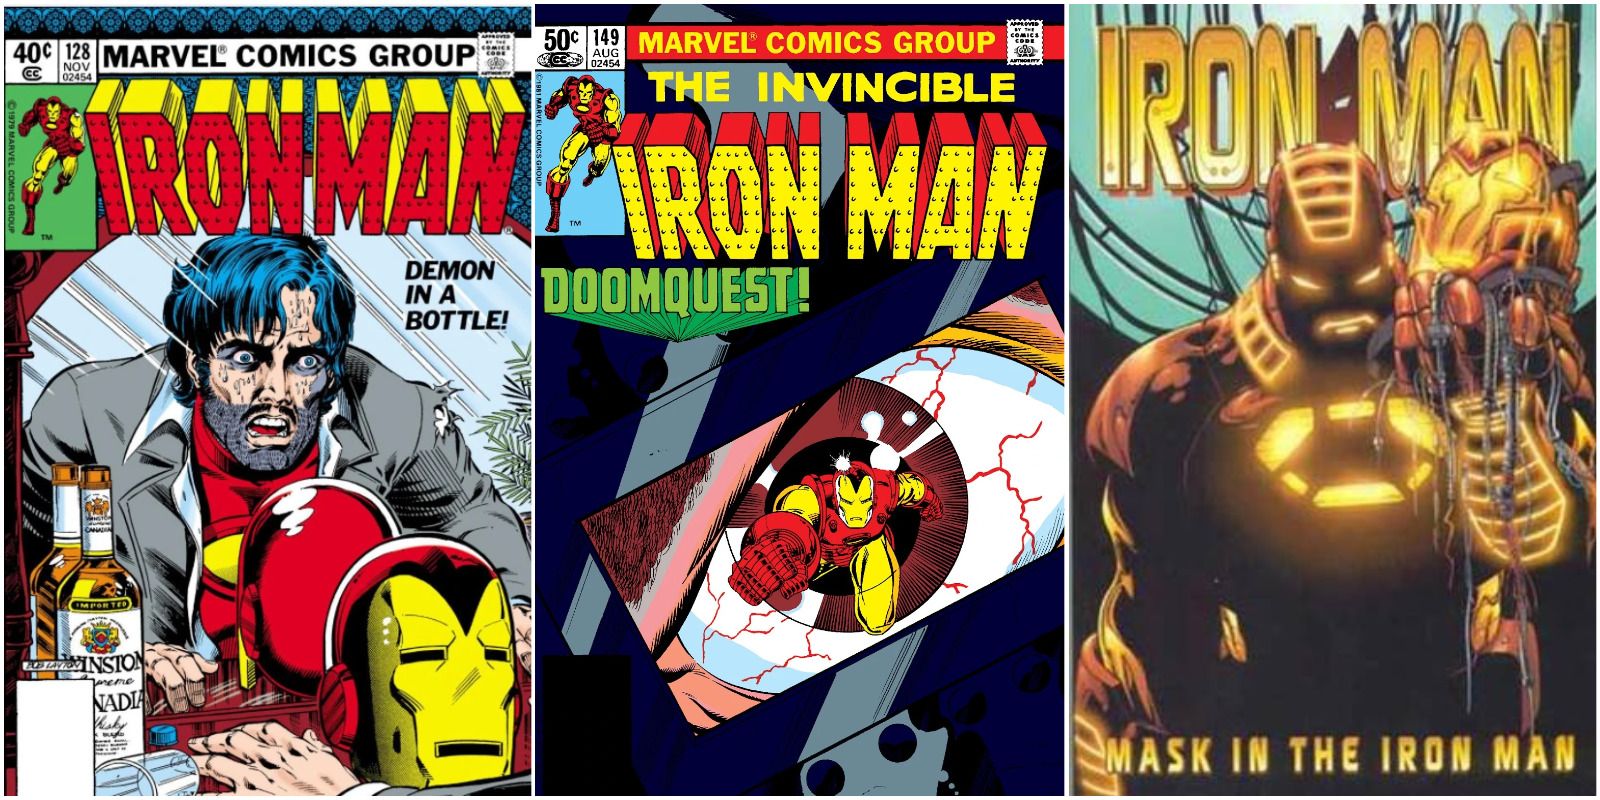 Demon In The Bottle, DoomQuest, Mask In The Iron Man